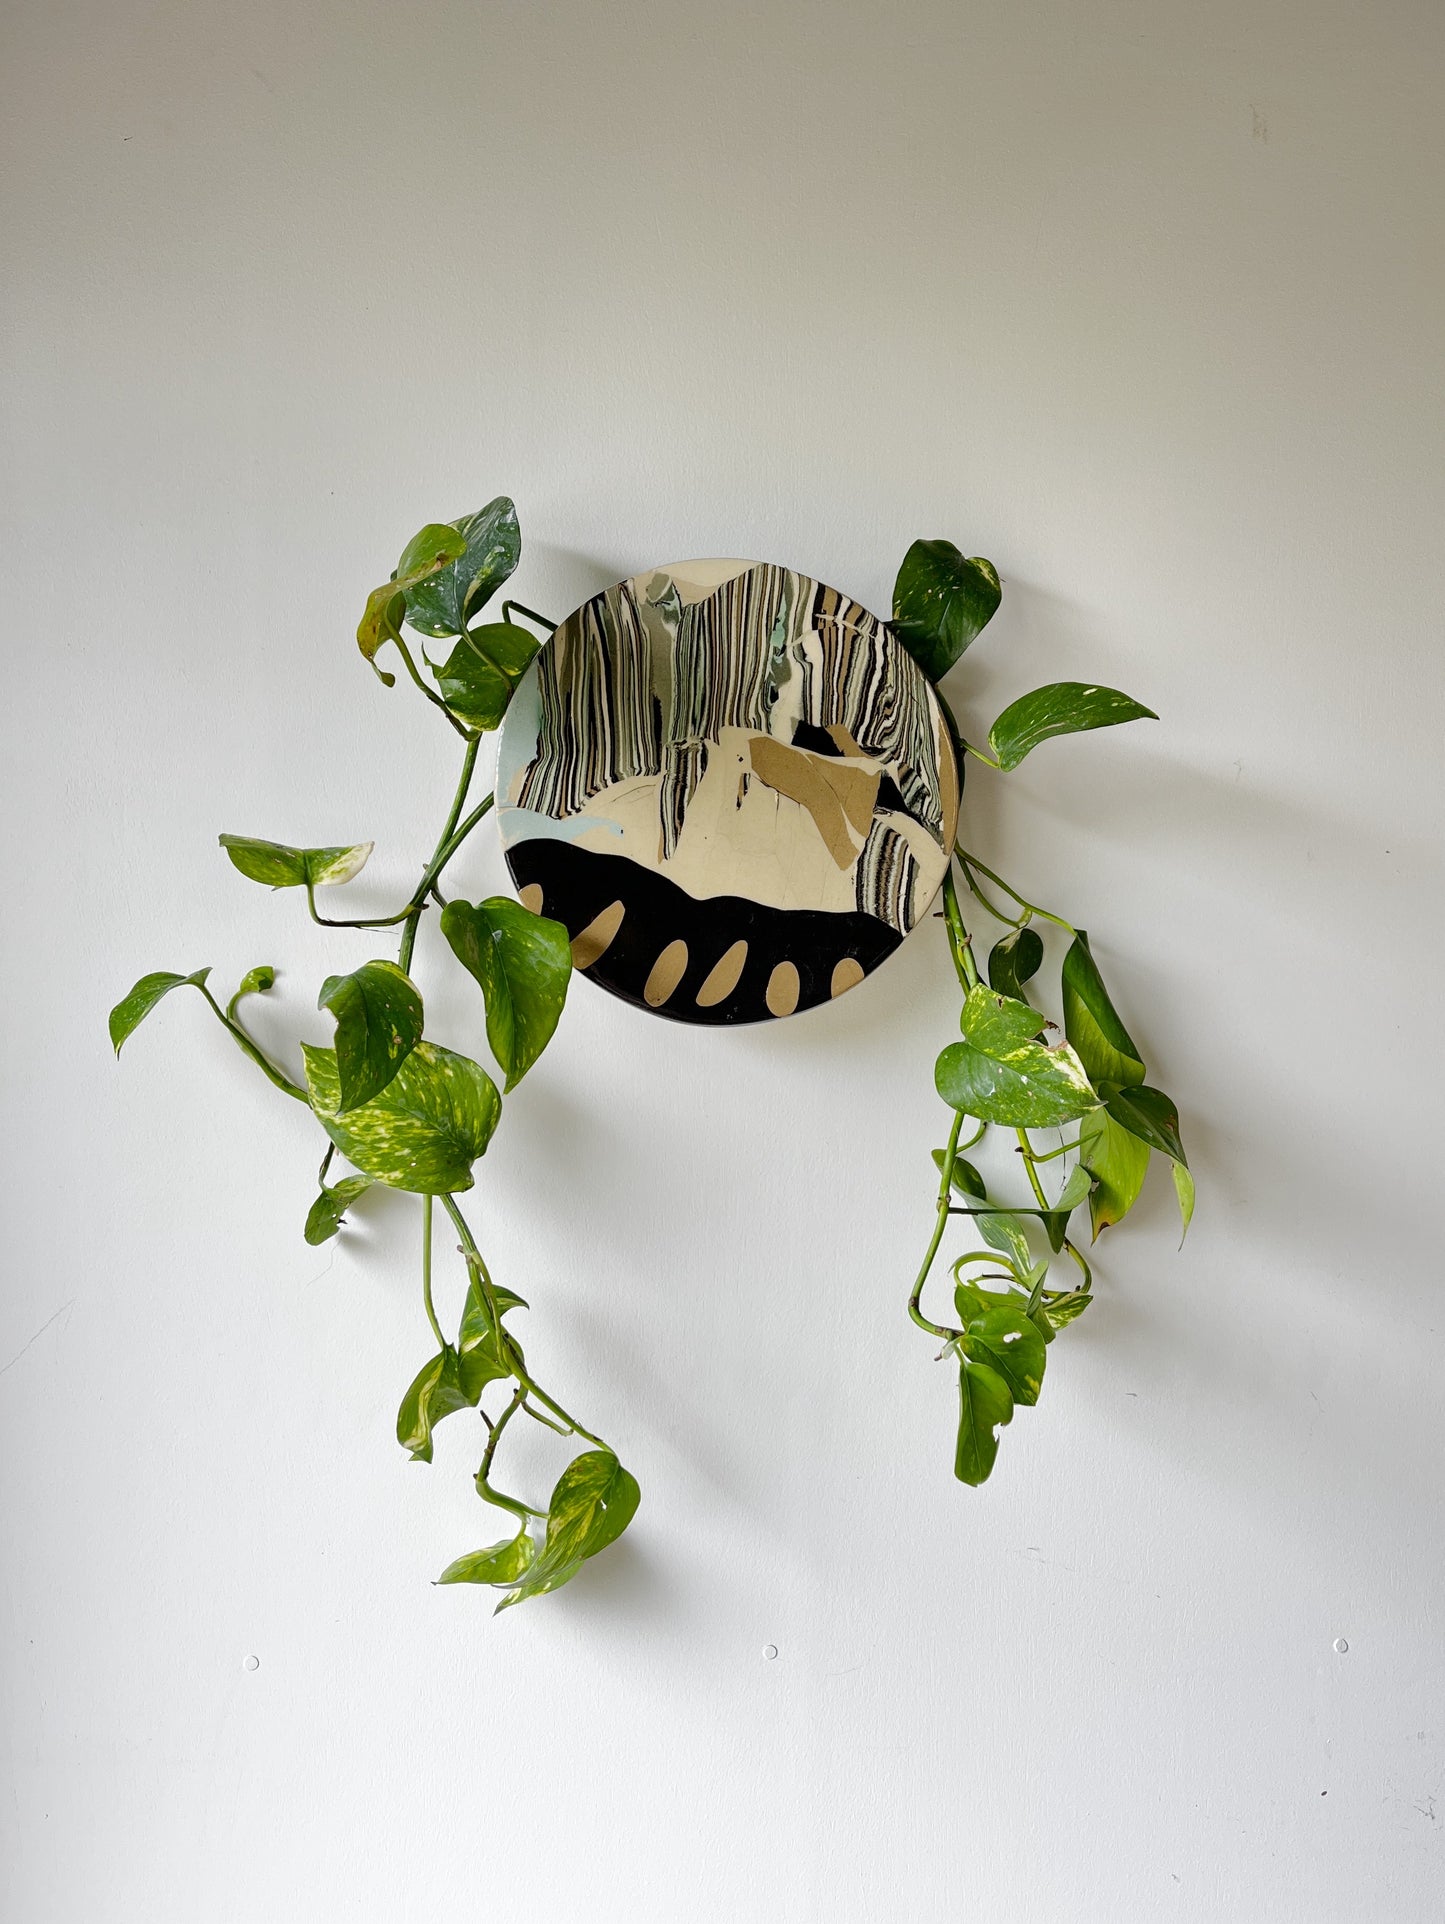 ‘Up the Cliff’ Wall Planter #1